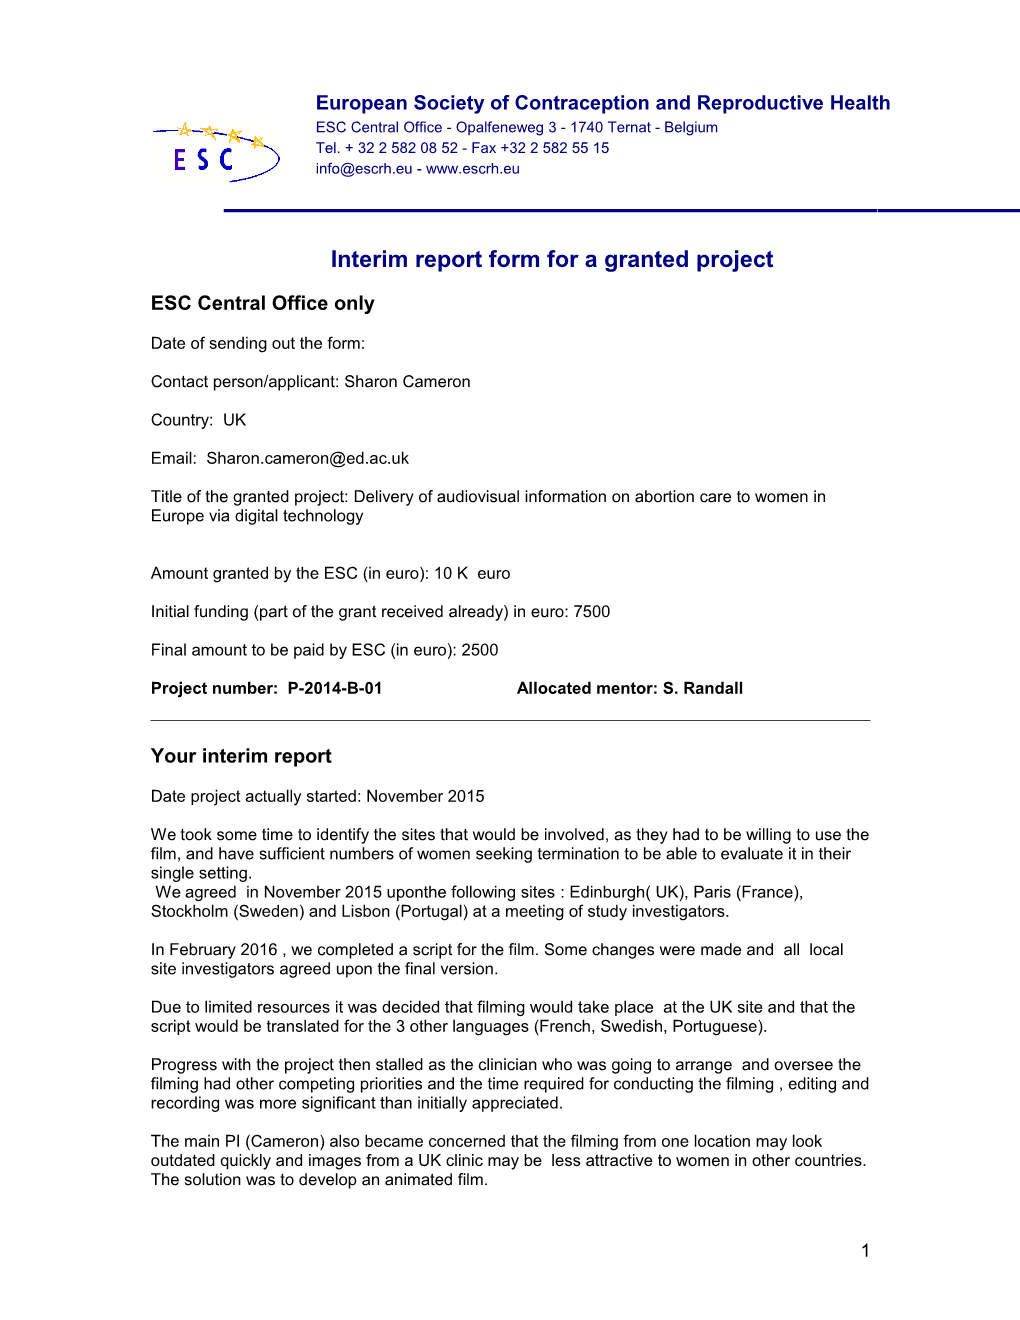 Interim Report Form for a Granted Project